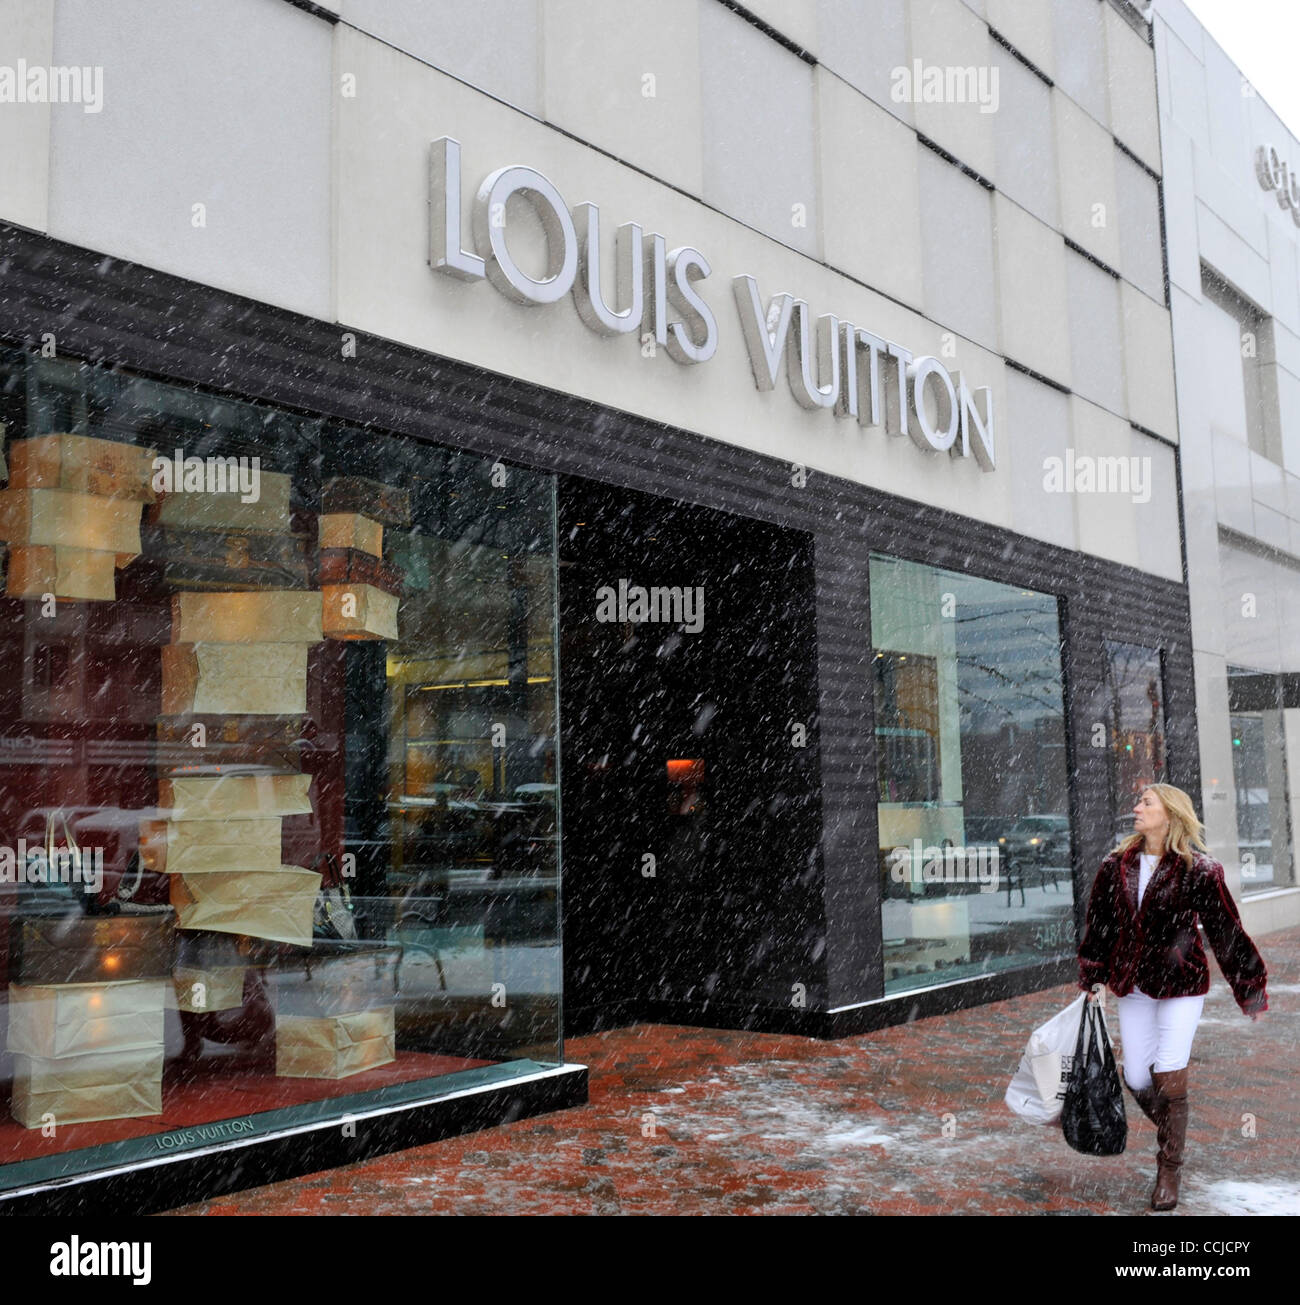 Dec. 16, 2010 - Chevy Chase, Maryland, U.S. - A Louis Vuitton store during  a snow storm in Chevy Chase. Despite a down economy, sales of luxury goods  in the U.S. are